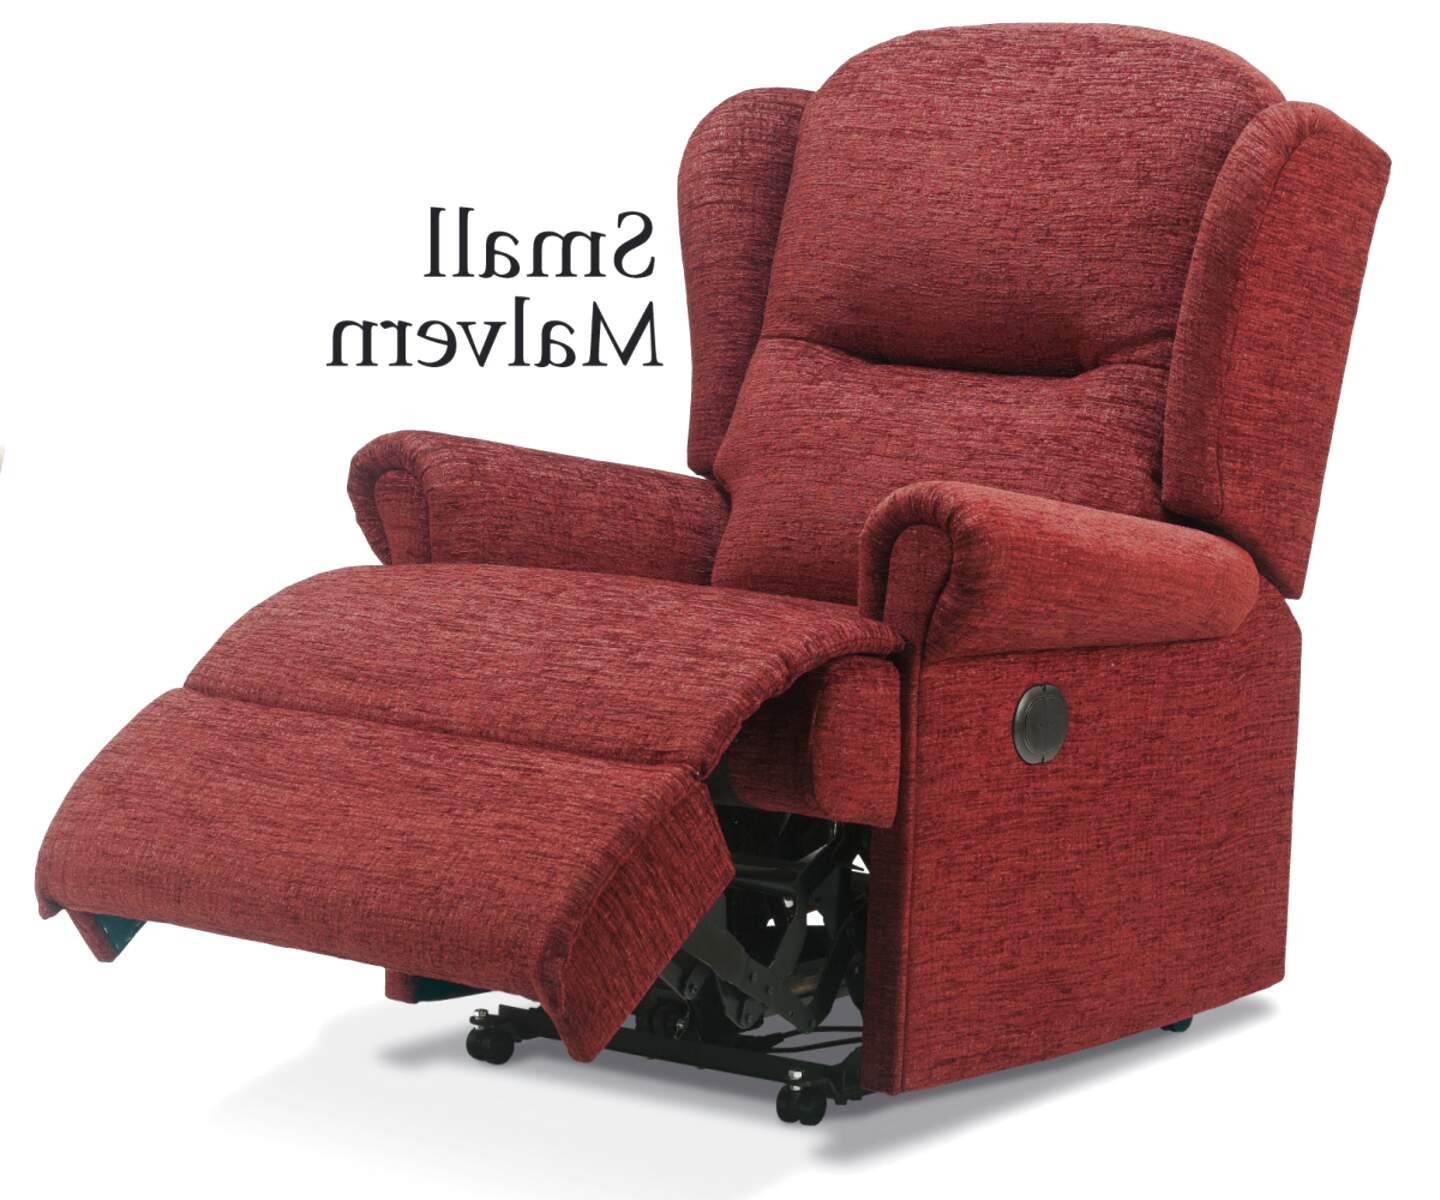 Sherborne Recliner Chair for sale in UK | 77 used Sherborne Recliner Chairs